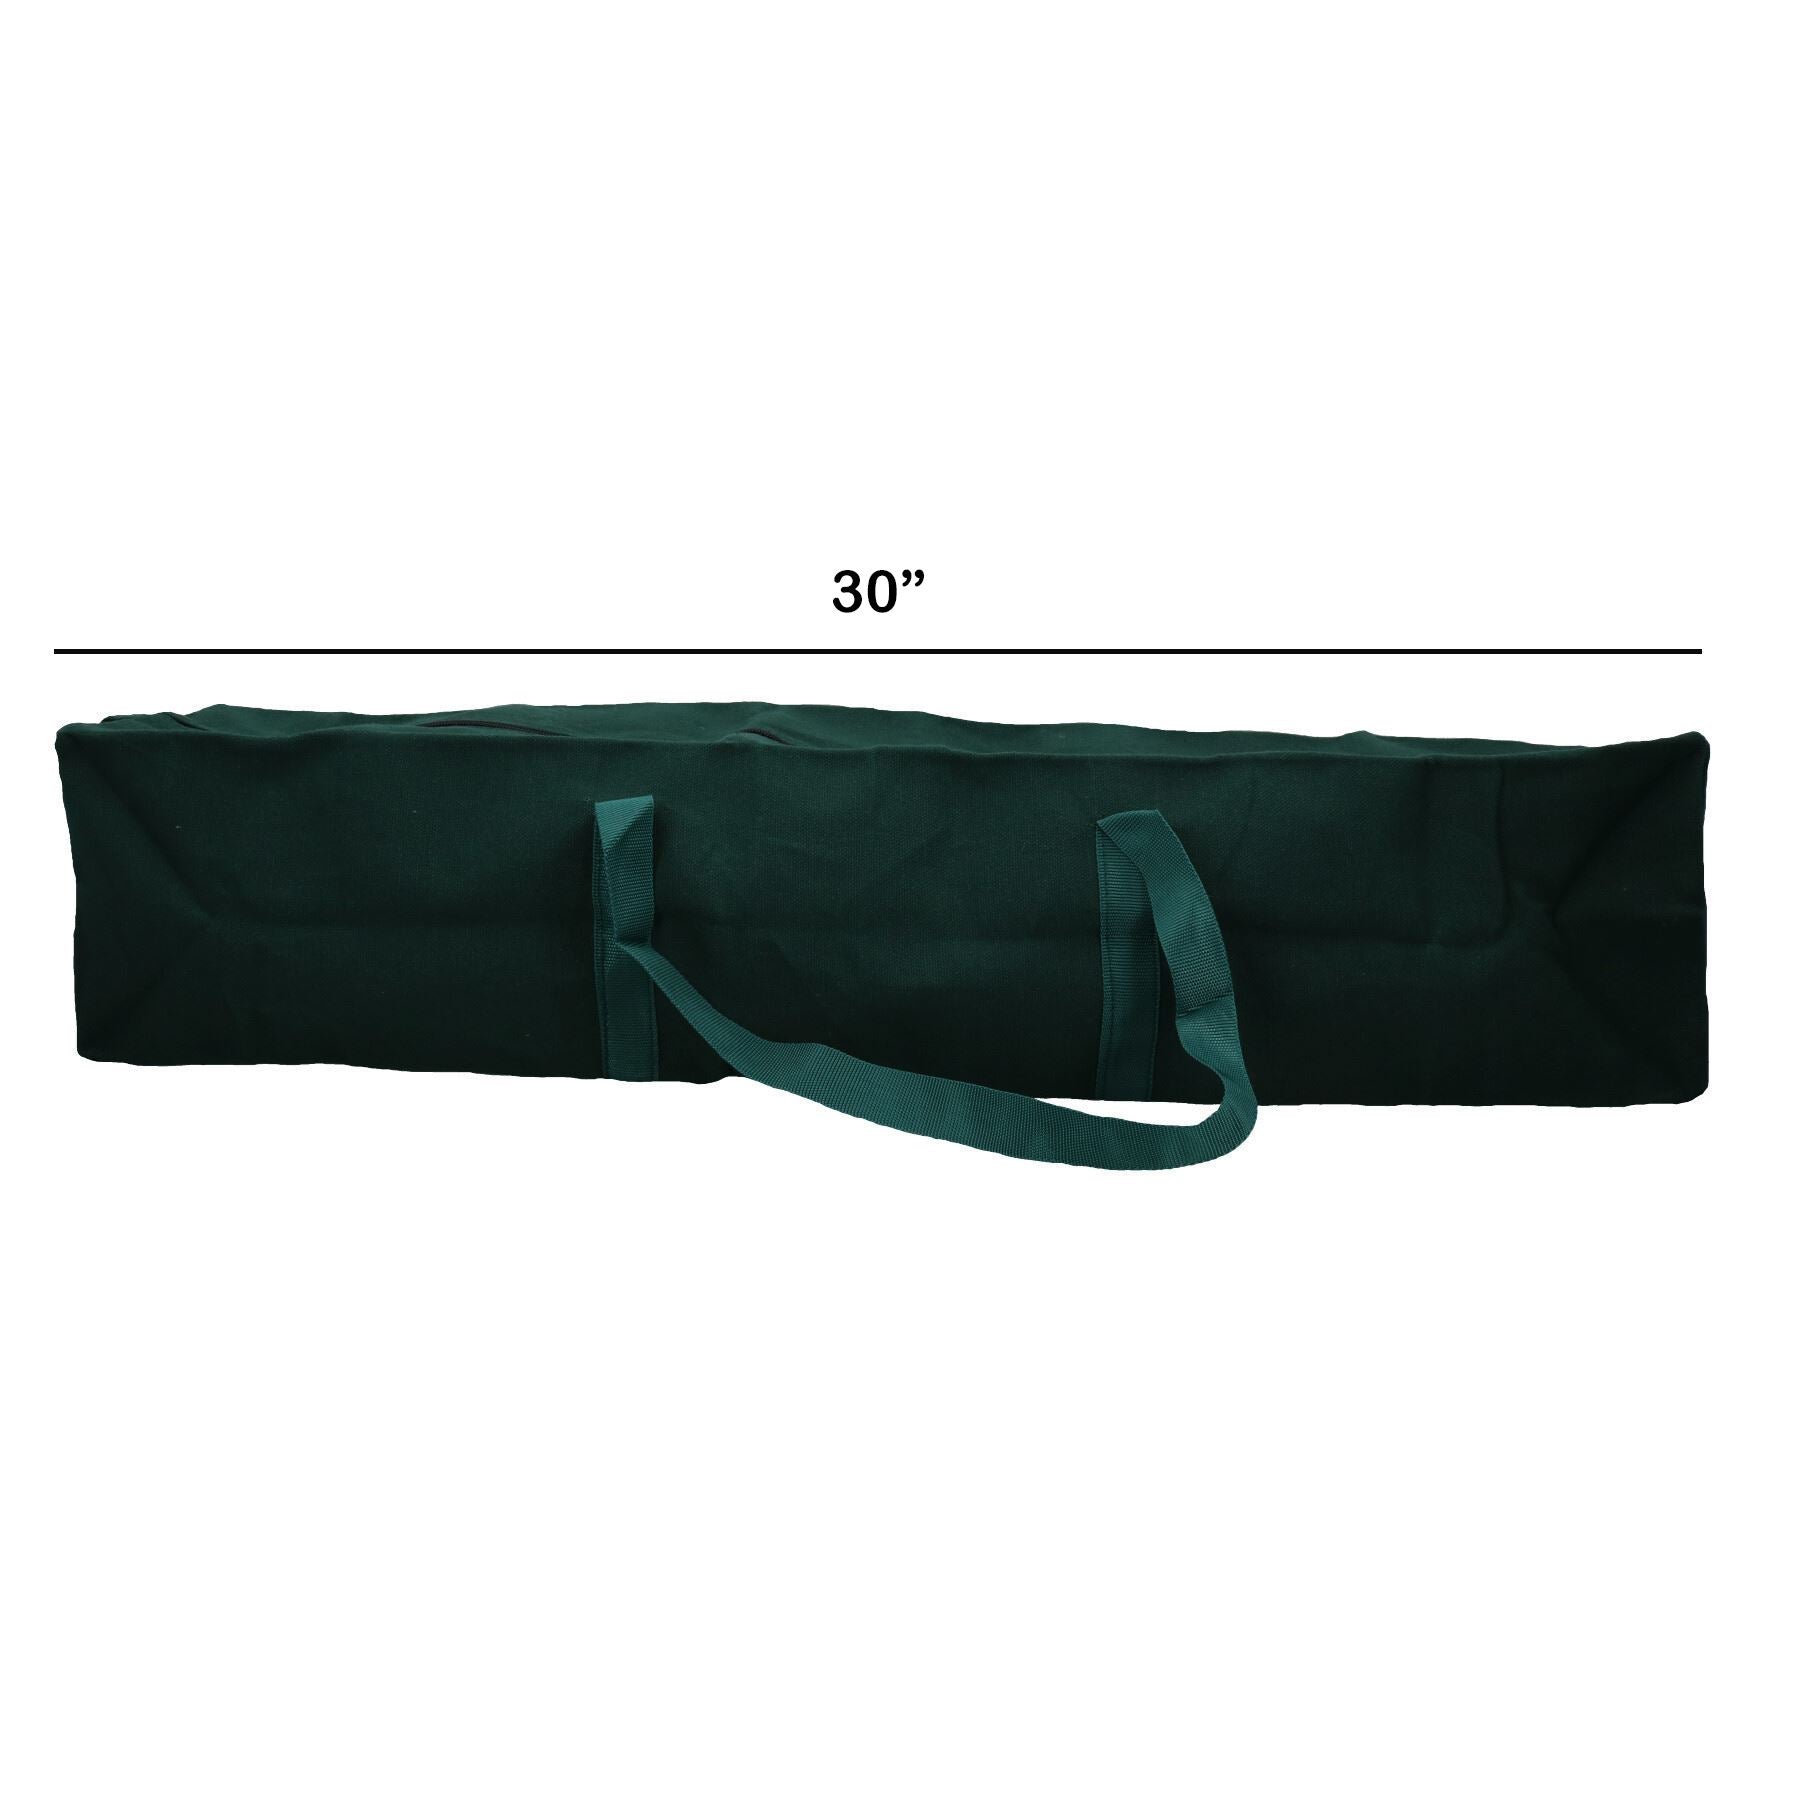 30” Heavy Duty Canvas Zipped Tool Carry Bag Storage Holder Fishing Camping